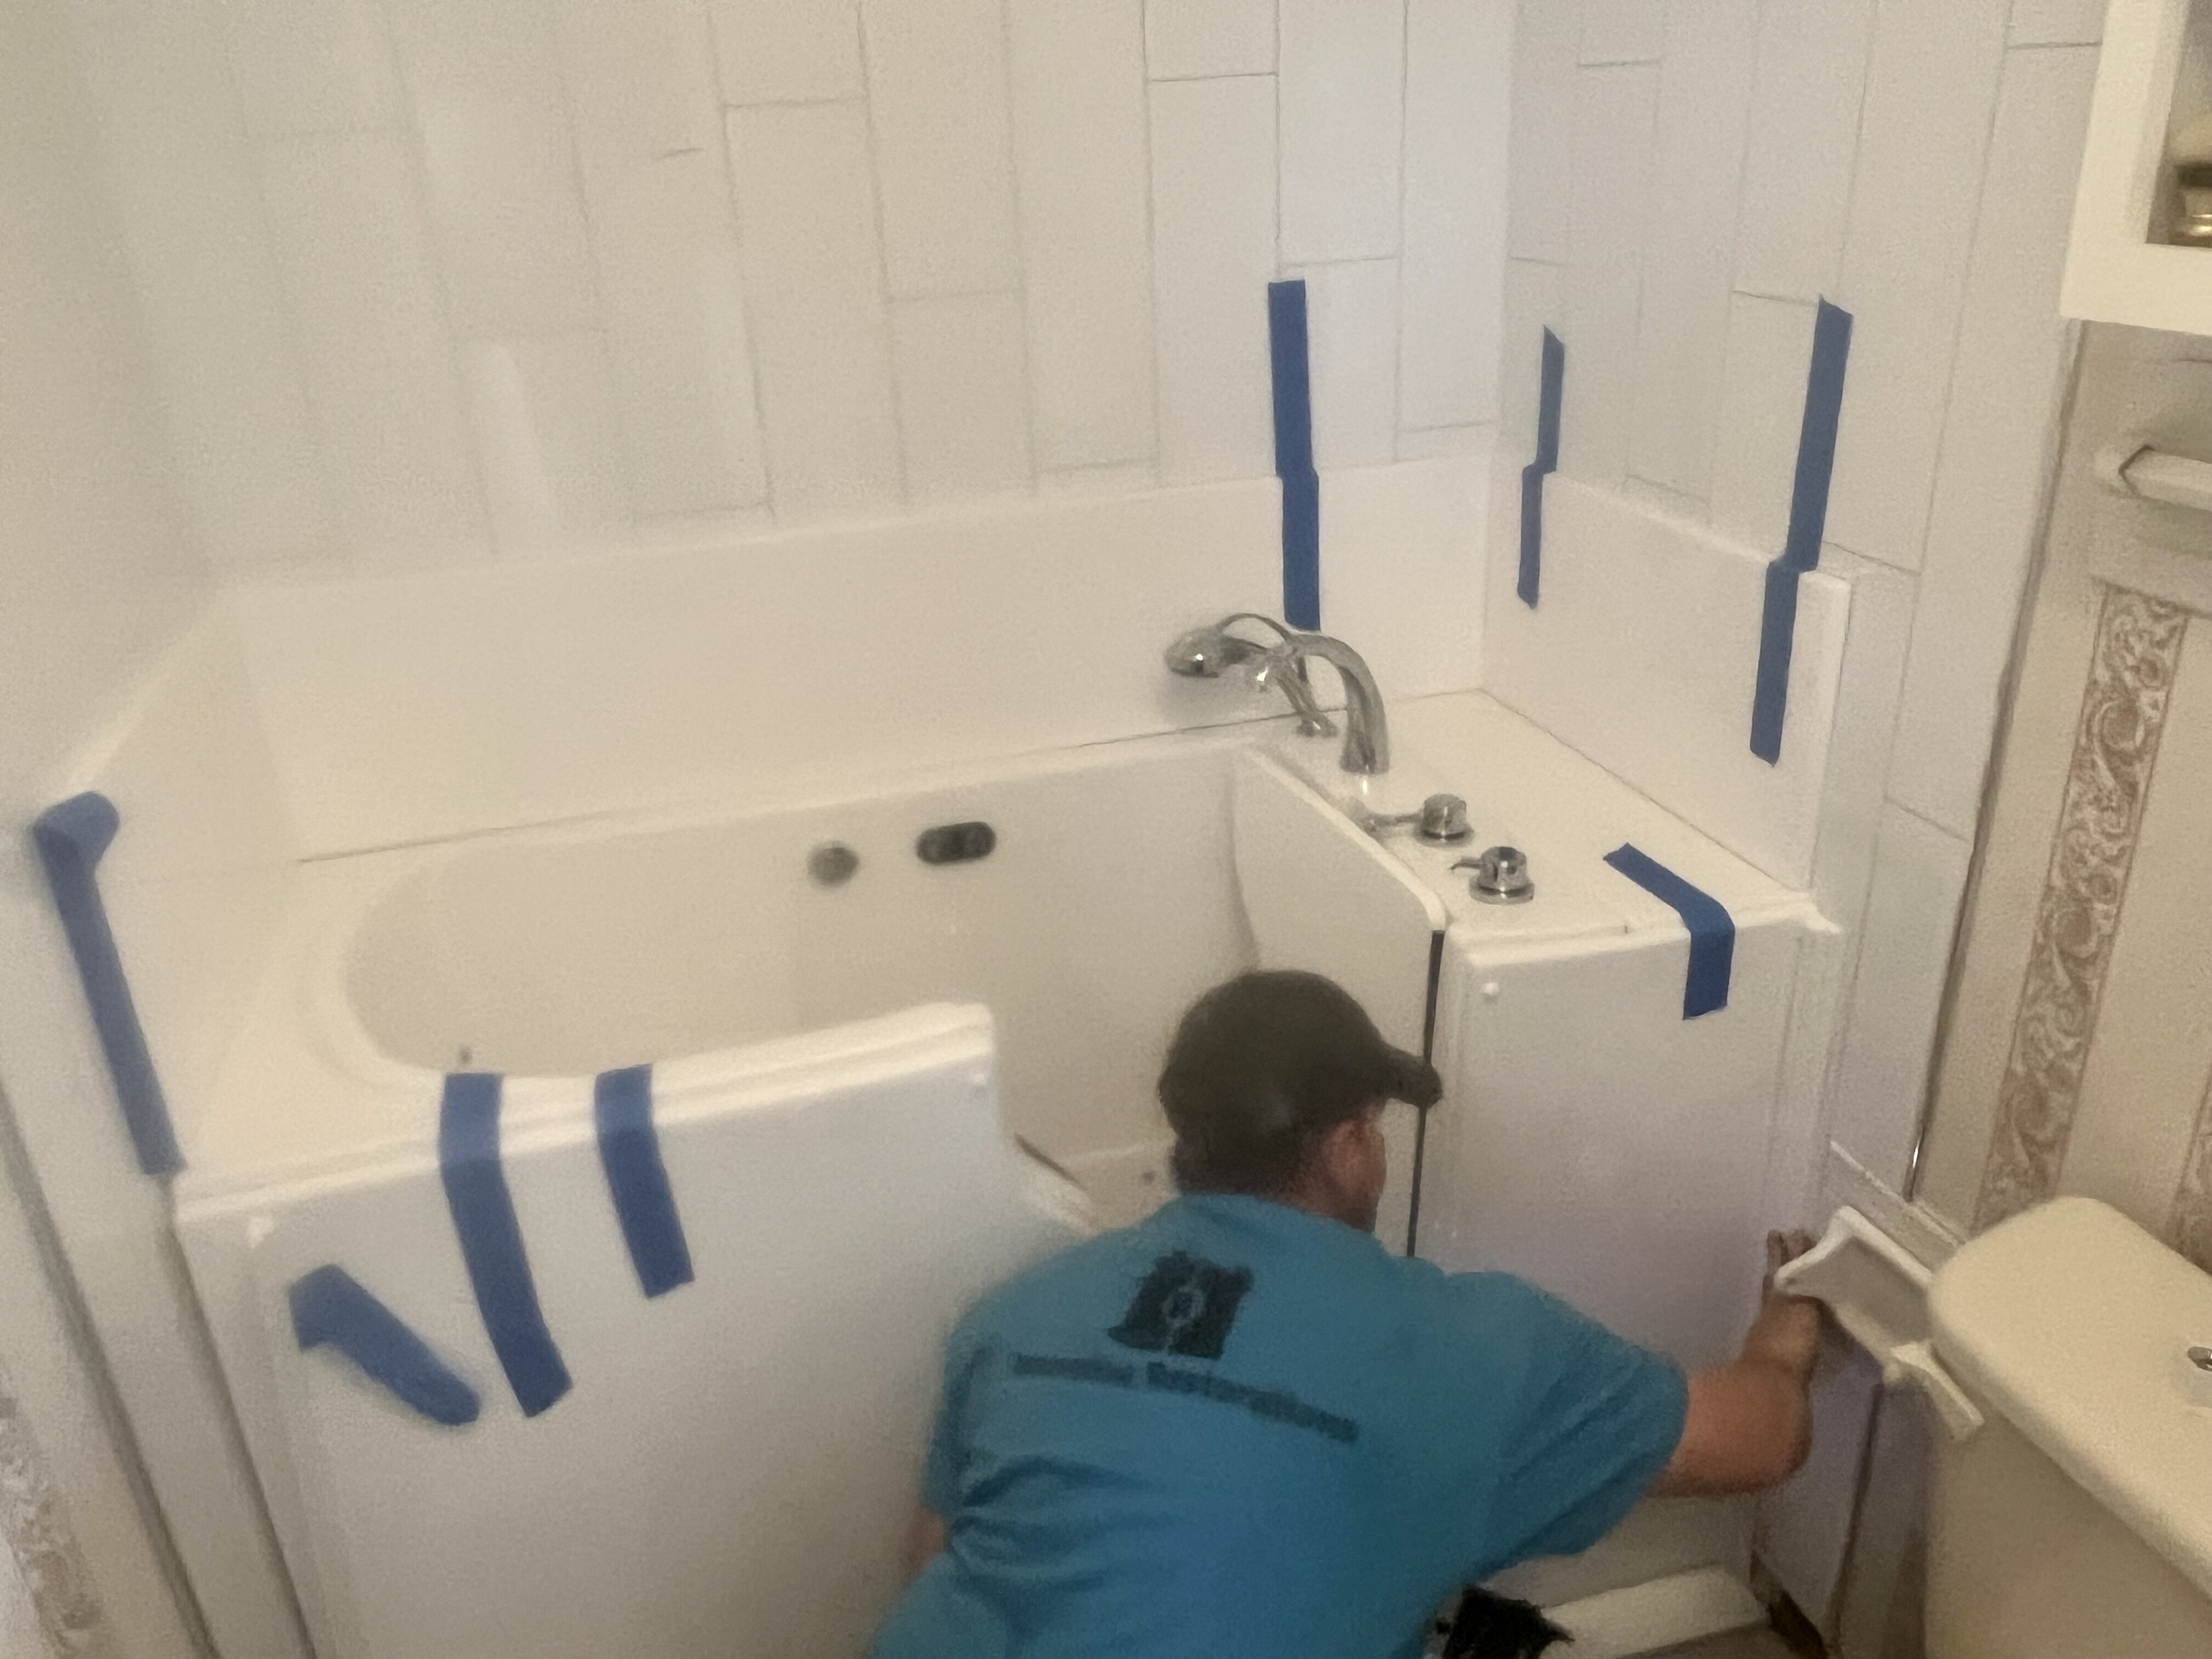 New tub being installed